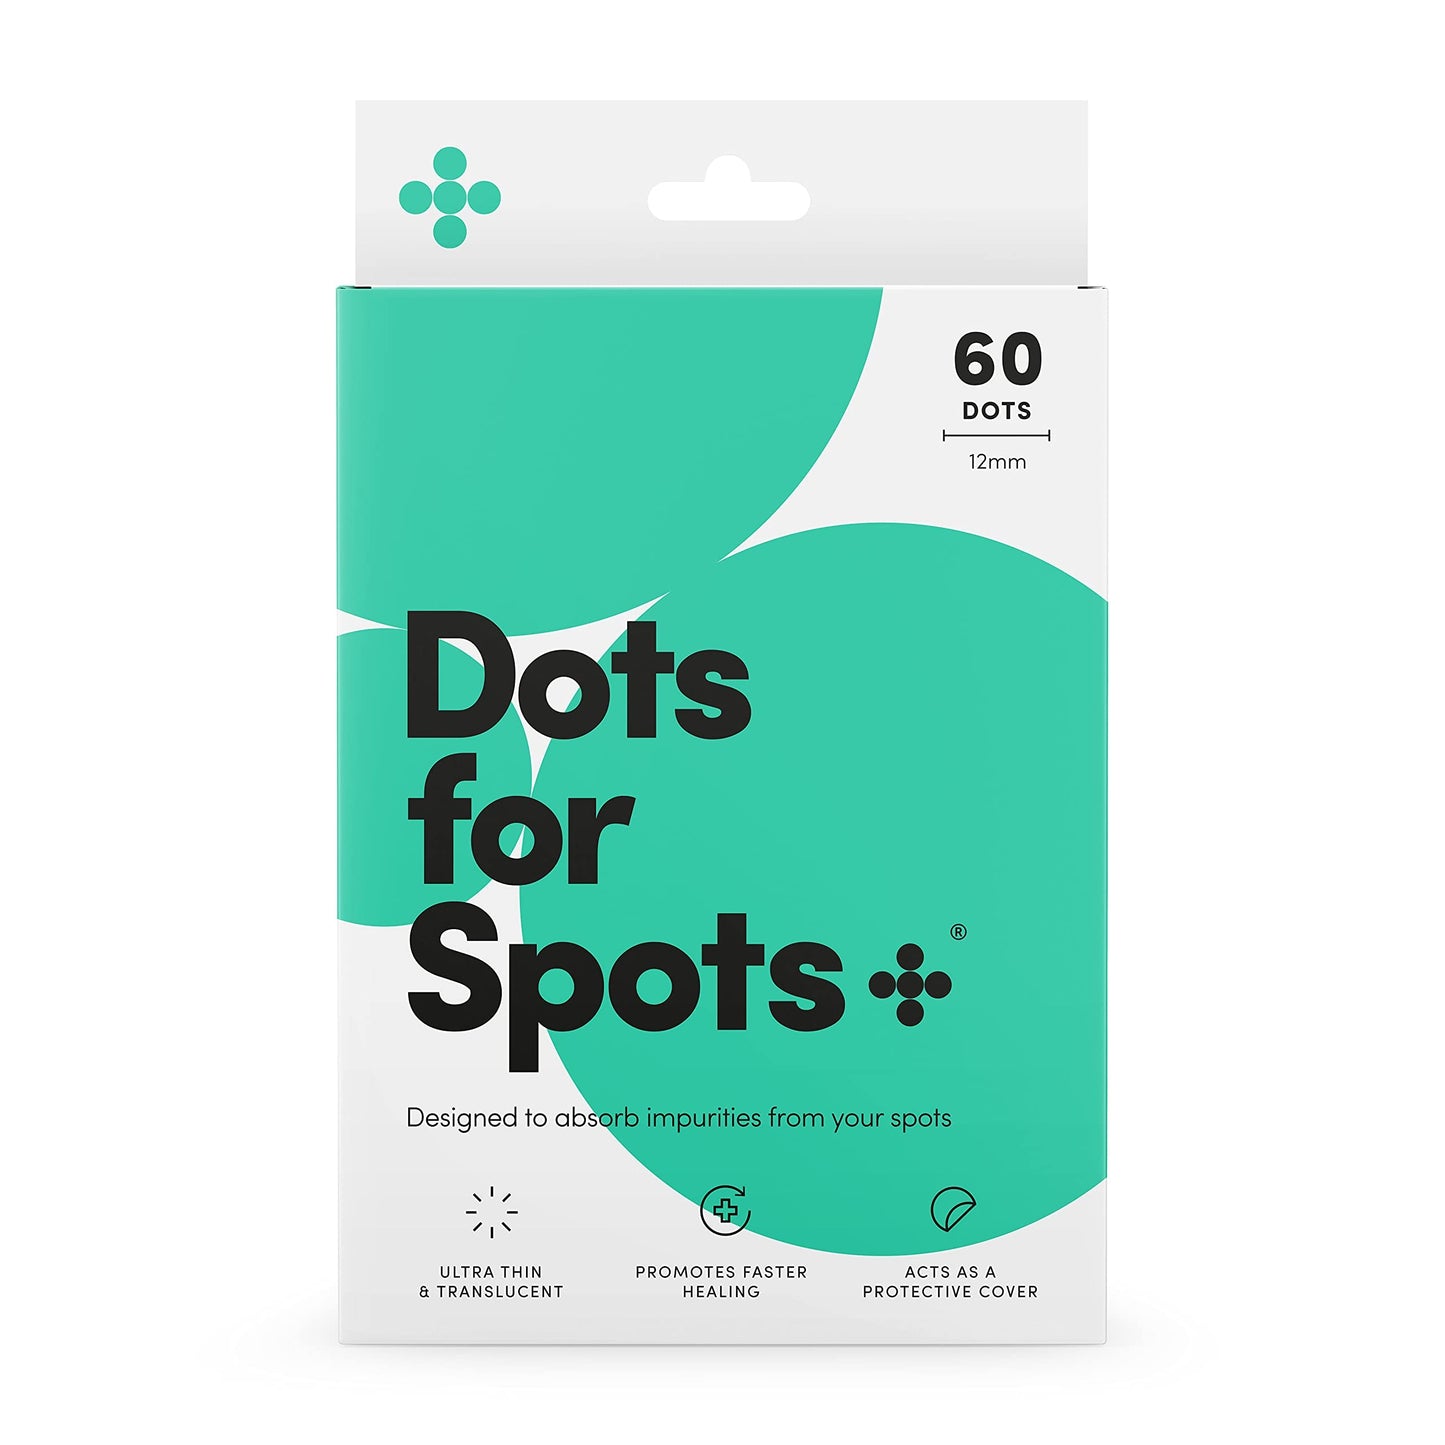 Dots for Spots Acne Patches - Pack of 24